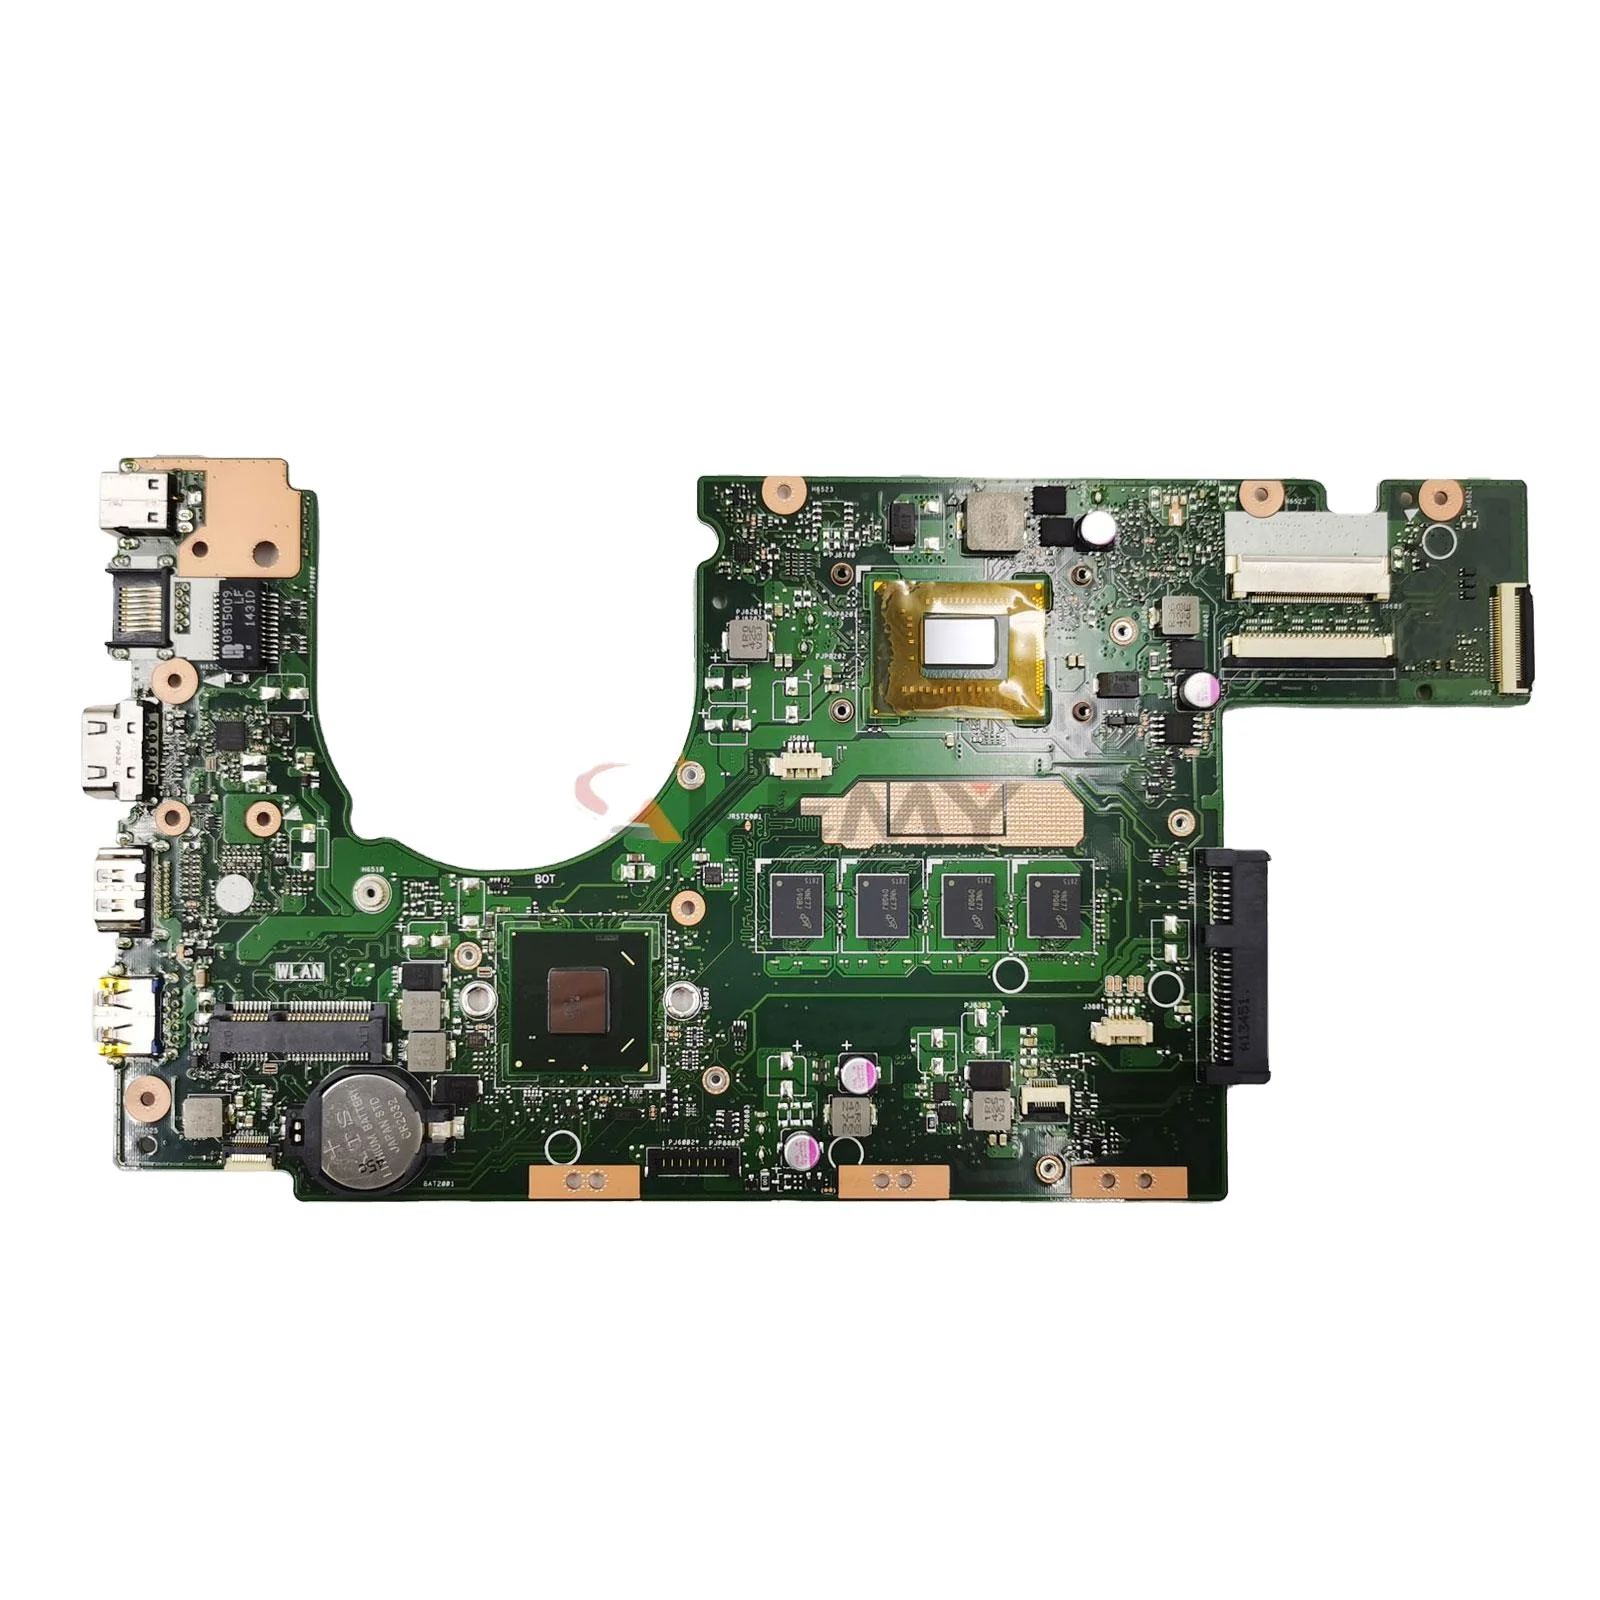 

Notebook Mainboard For ASUS Vivobook S300CA S300C S300 Laptop Motherboard i3 i5 i7 4GB/RAM MAIN BOARD TEST OK